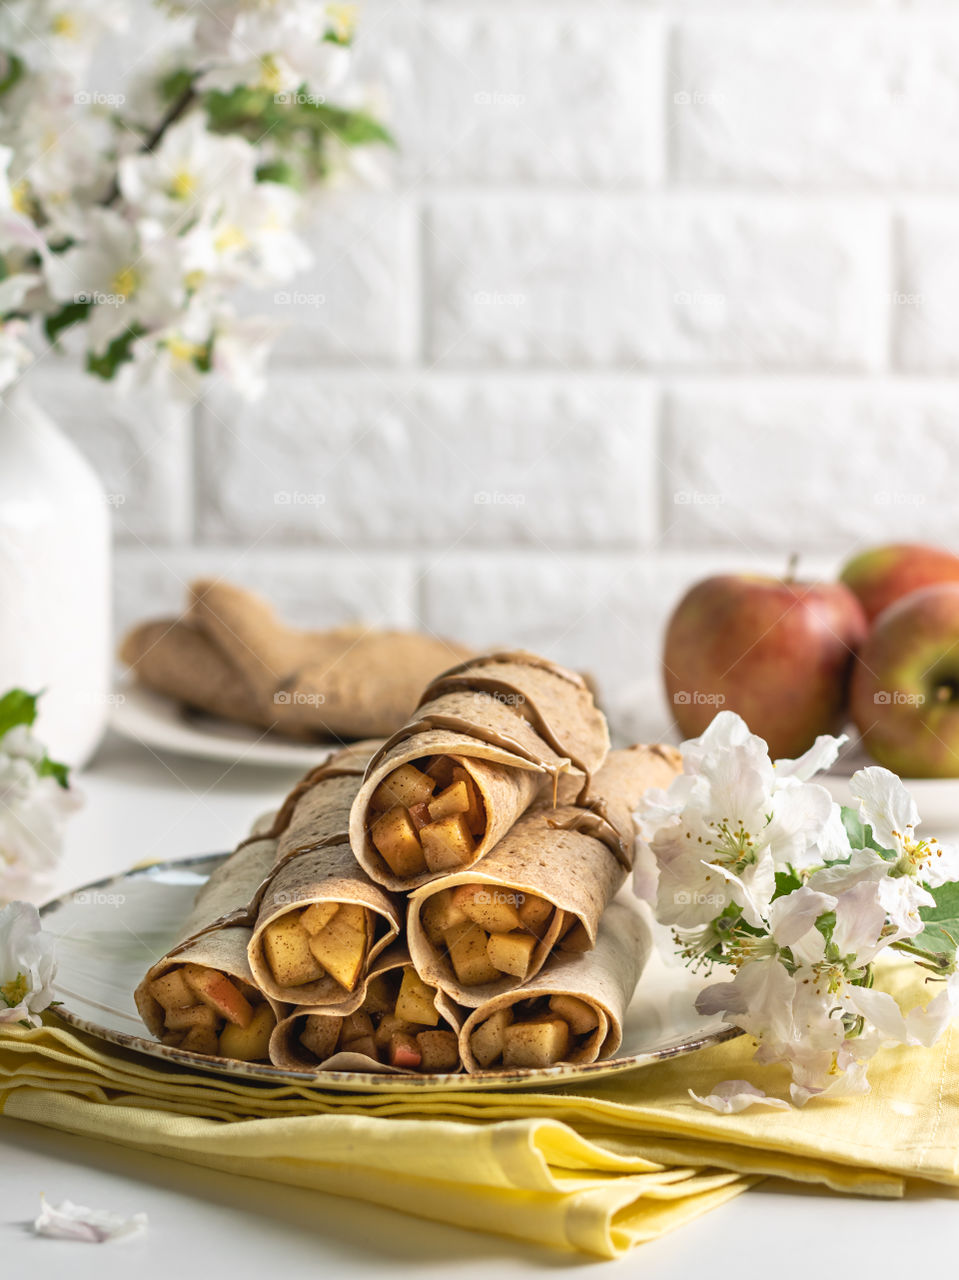 Crêpes filled with apples 